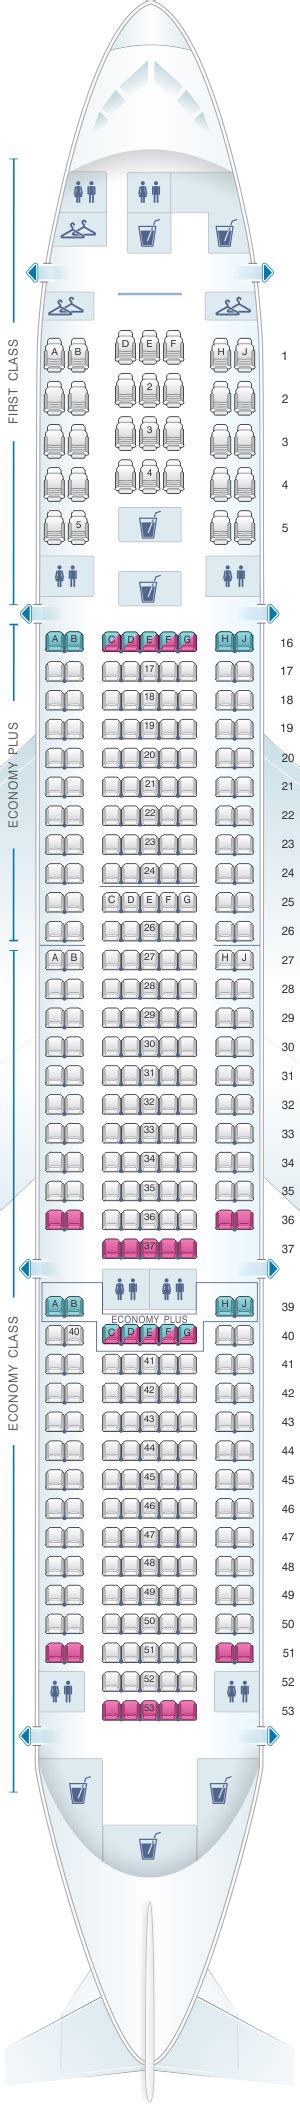 For your next United flight, use this seating chart to get the most comfortable seats, legroom, and recline on . ... United Seat Maps. Overview; Planes & Seat Maps. Airbus A319 (319) Layout 1; Airbus A319 (319) Layout 2; ... Boeing 777-200 (772) Layout 1; Boeing 777-200 (772) Layout 2;. 